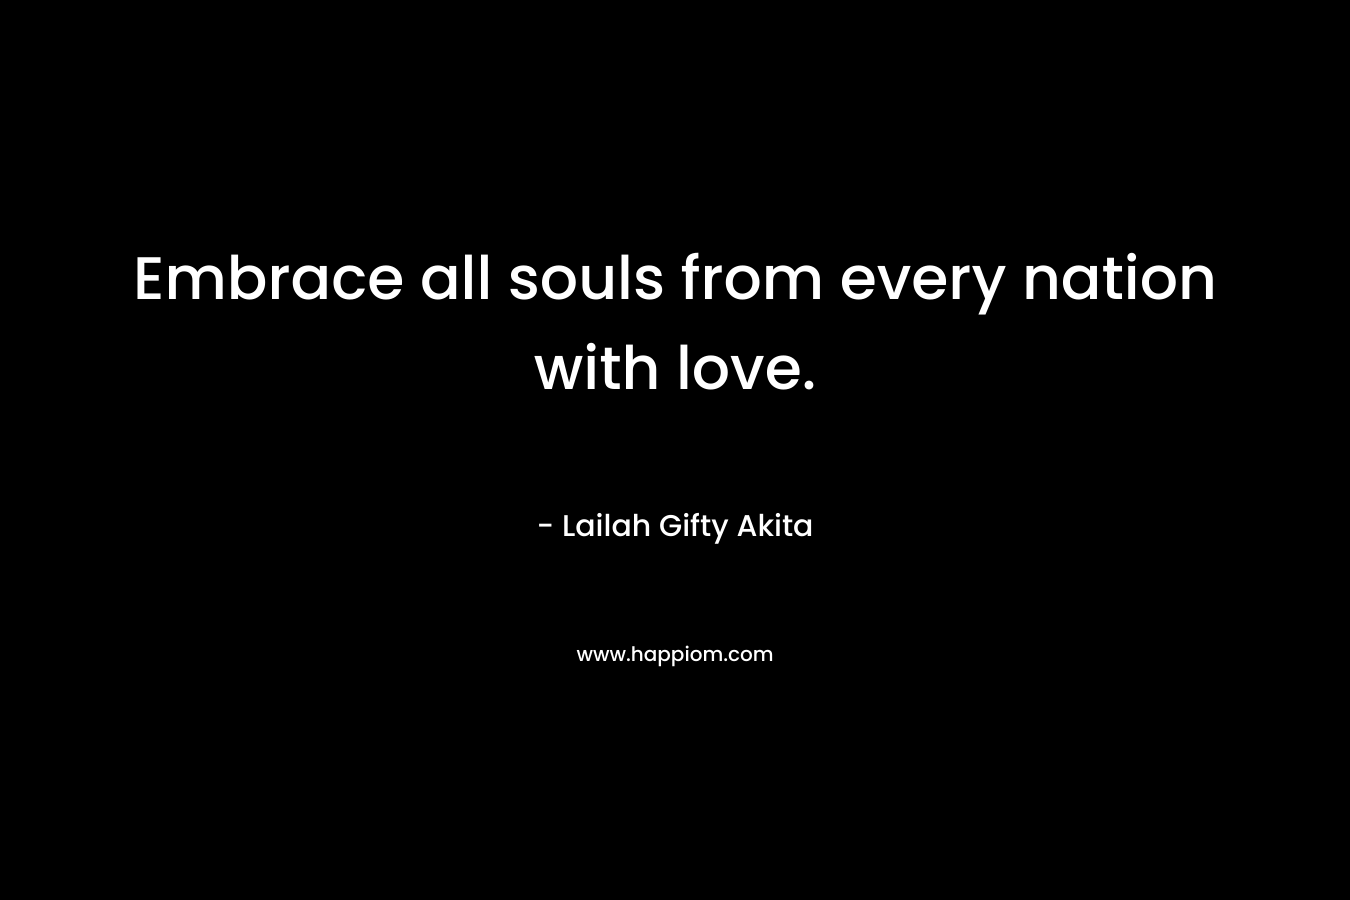 Embrace all souls from every nation with love.